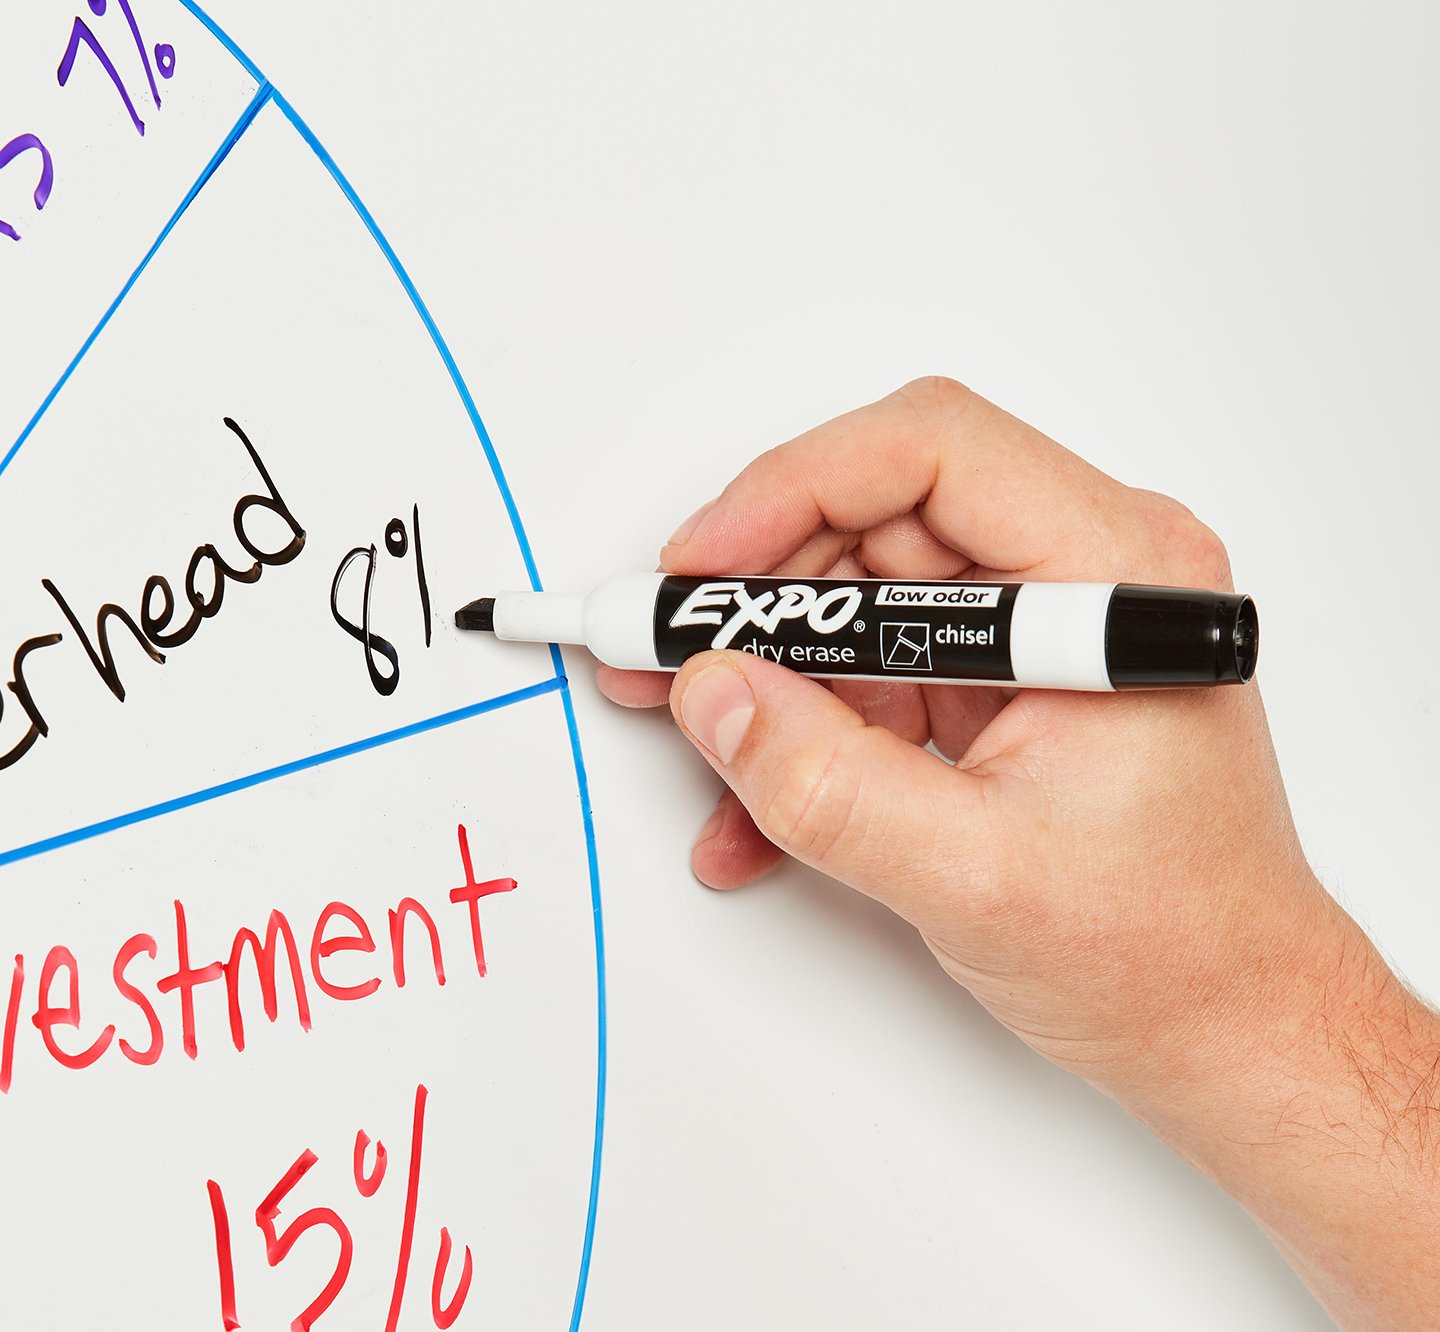 Testing different dry erase markers… Brand: Expo Neons for window/mirr